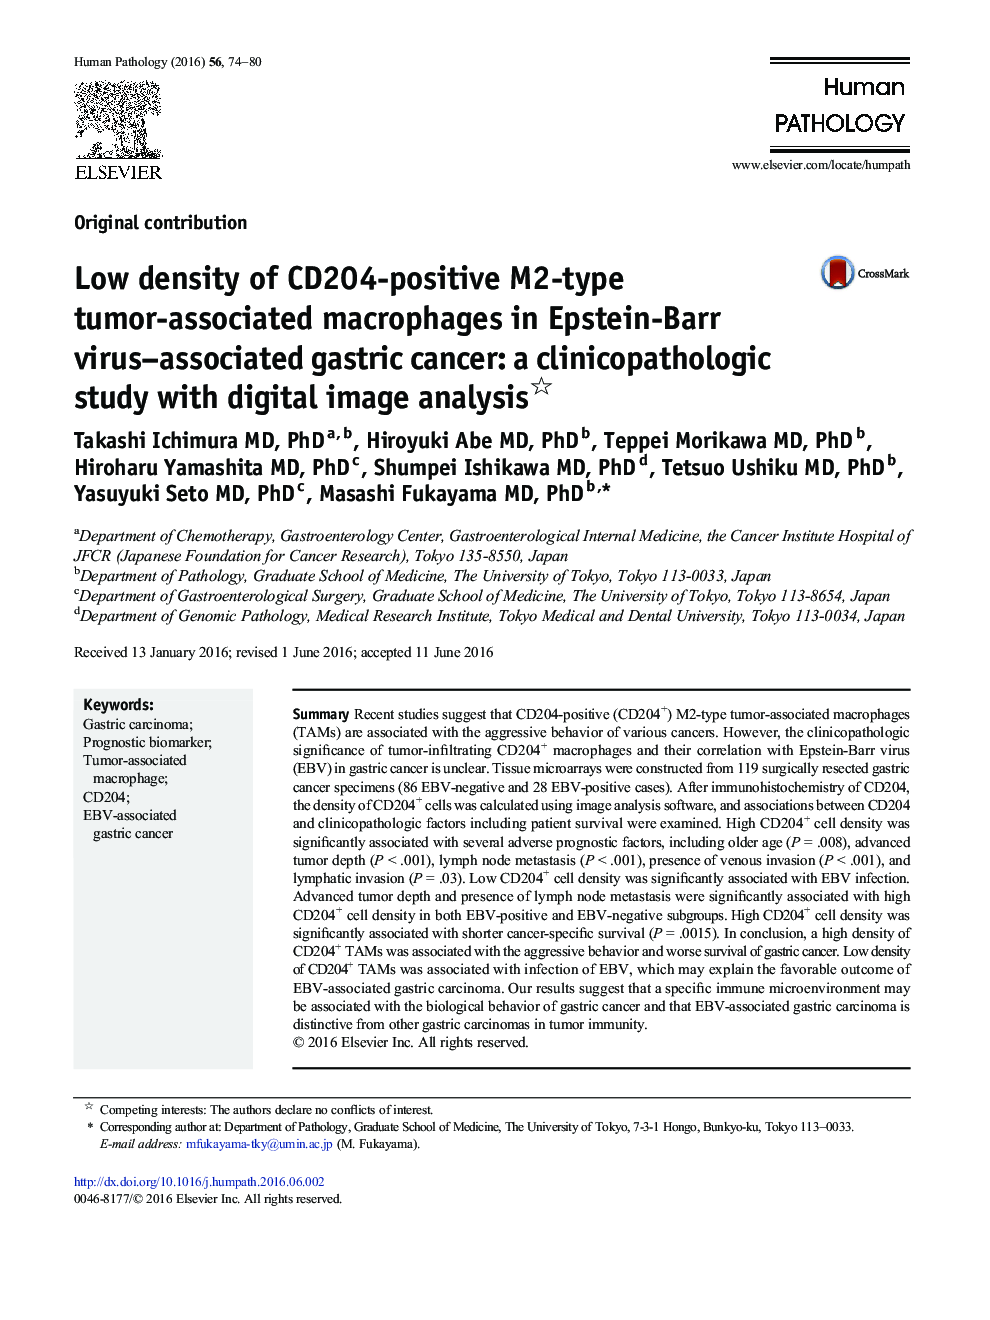 Low density of CD204-positive M2-type tumor-associated macrophages in Epstein-Barr virus–associated gastric cancer: a clinicopathologic study with digital image analysis 